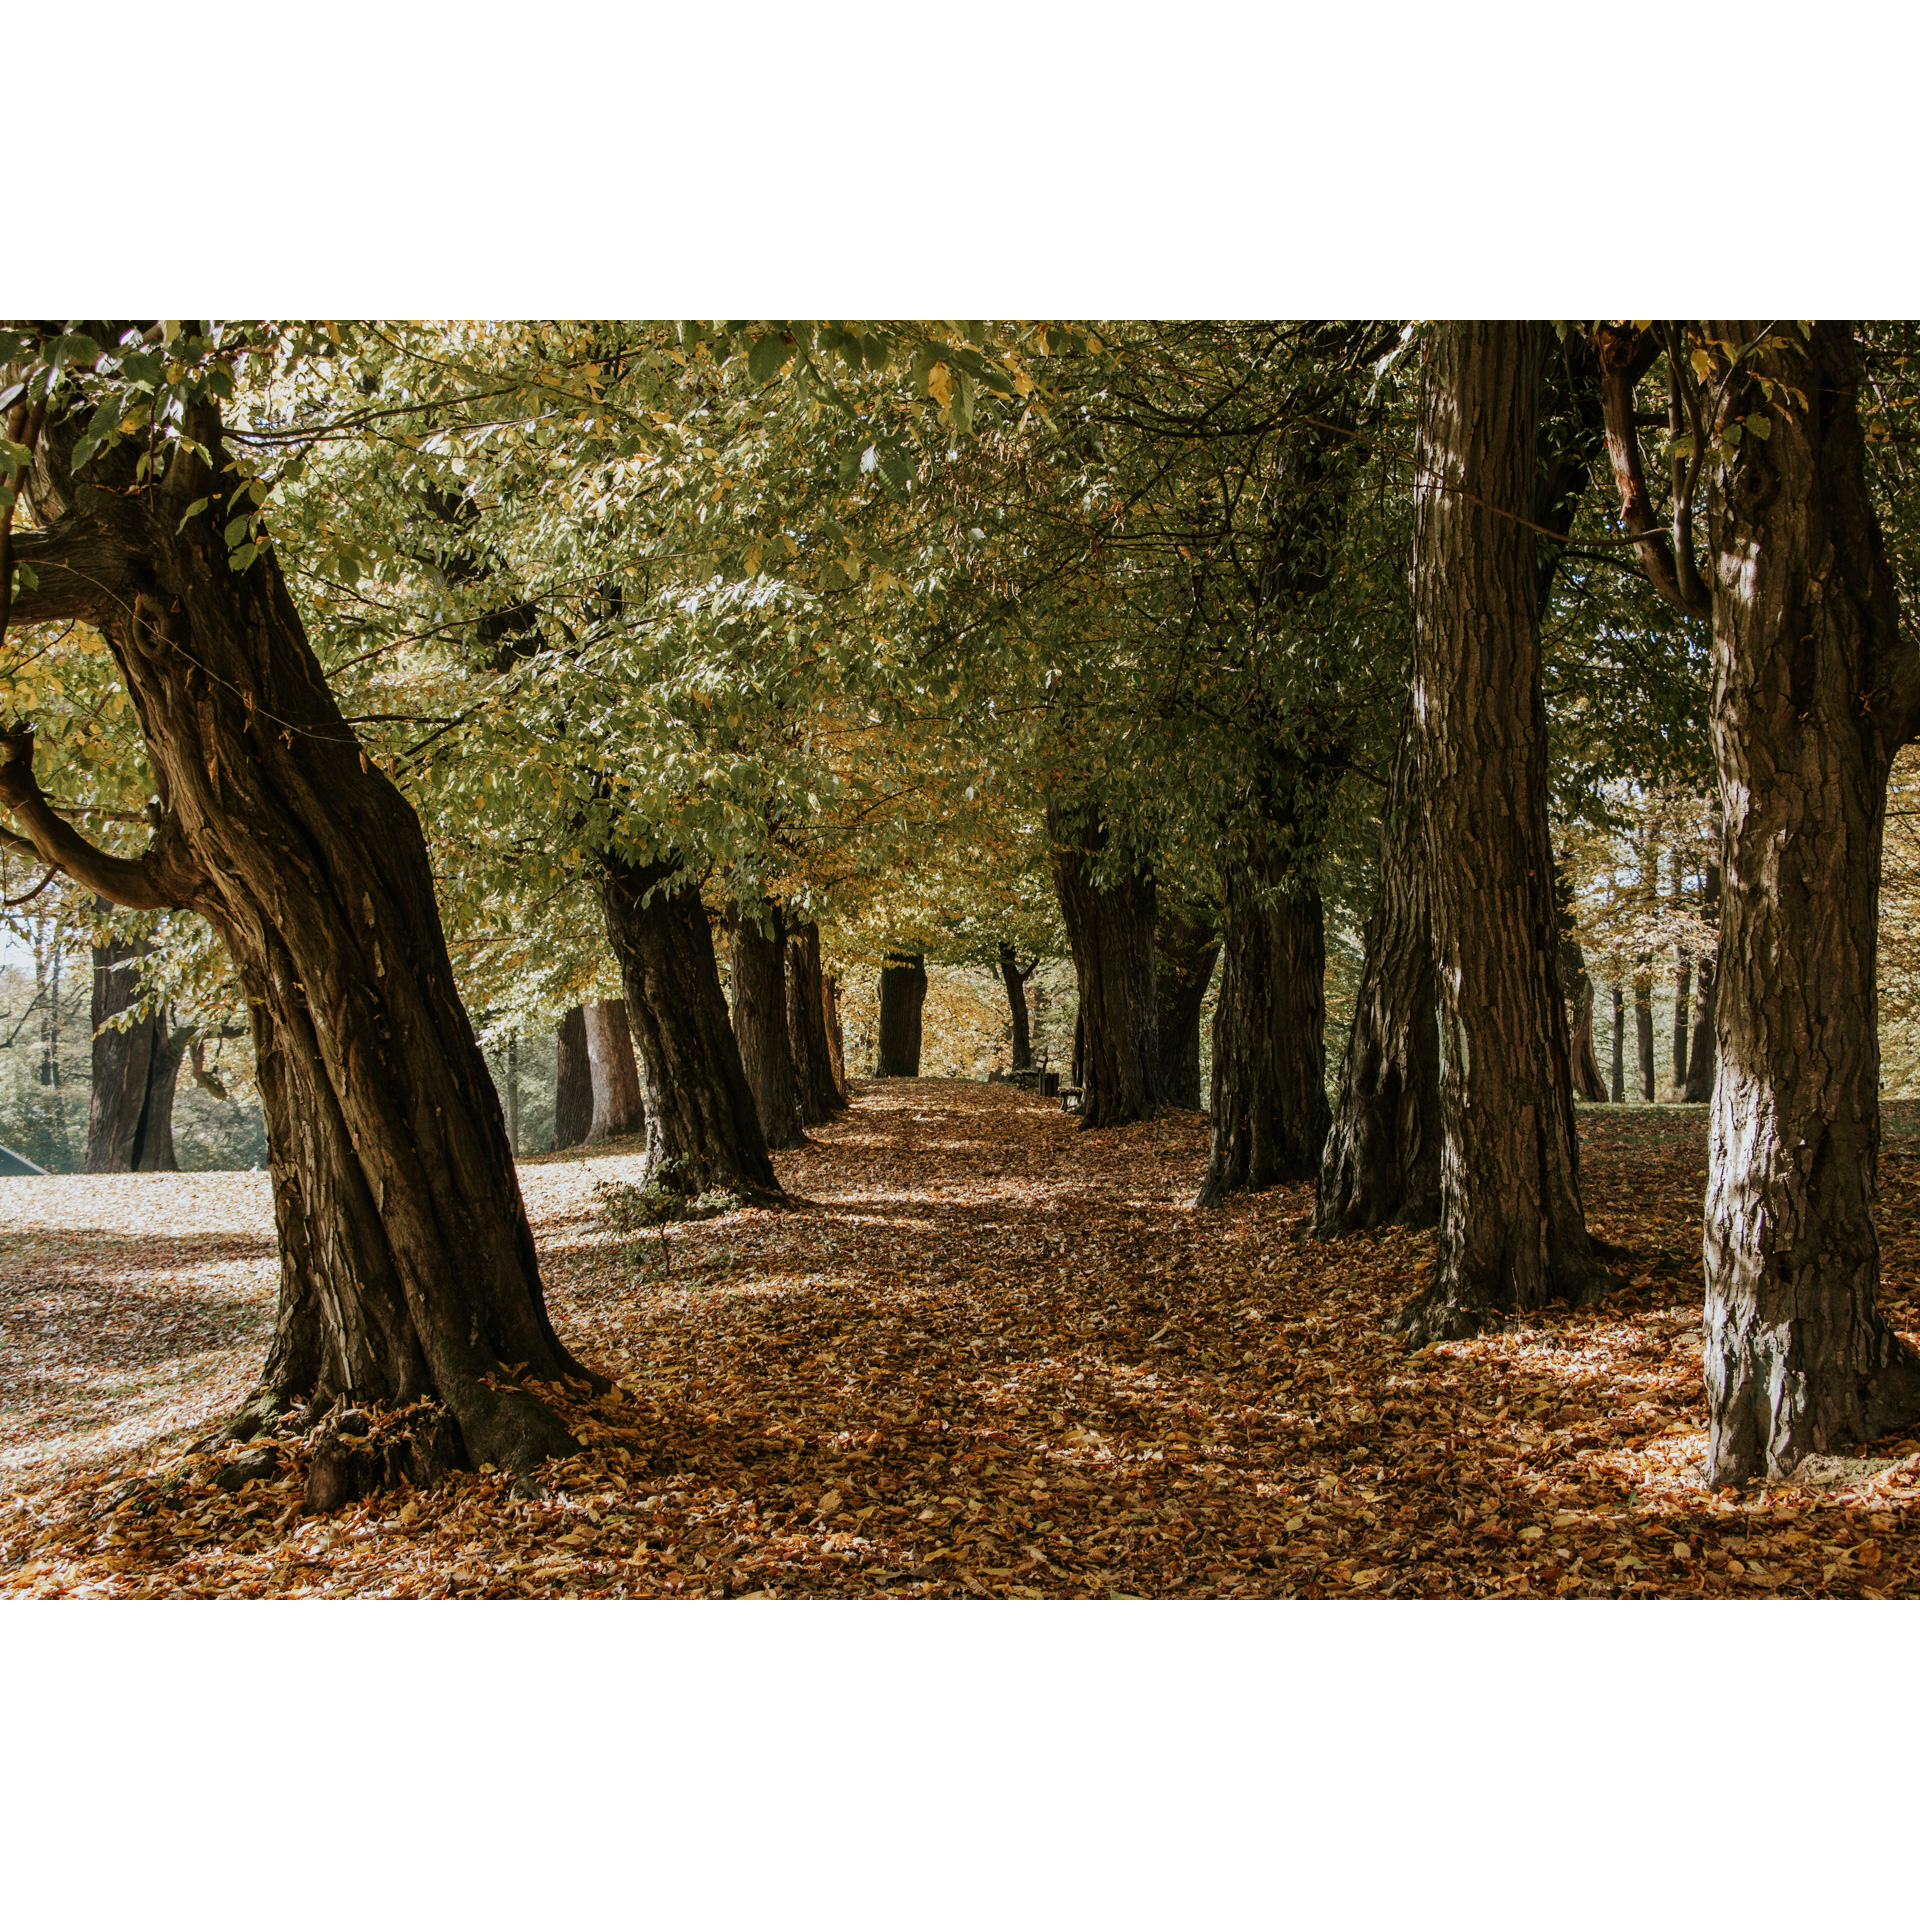 An alley running between deciduous trees with thick trunks covered with brown leaves